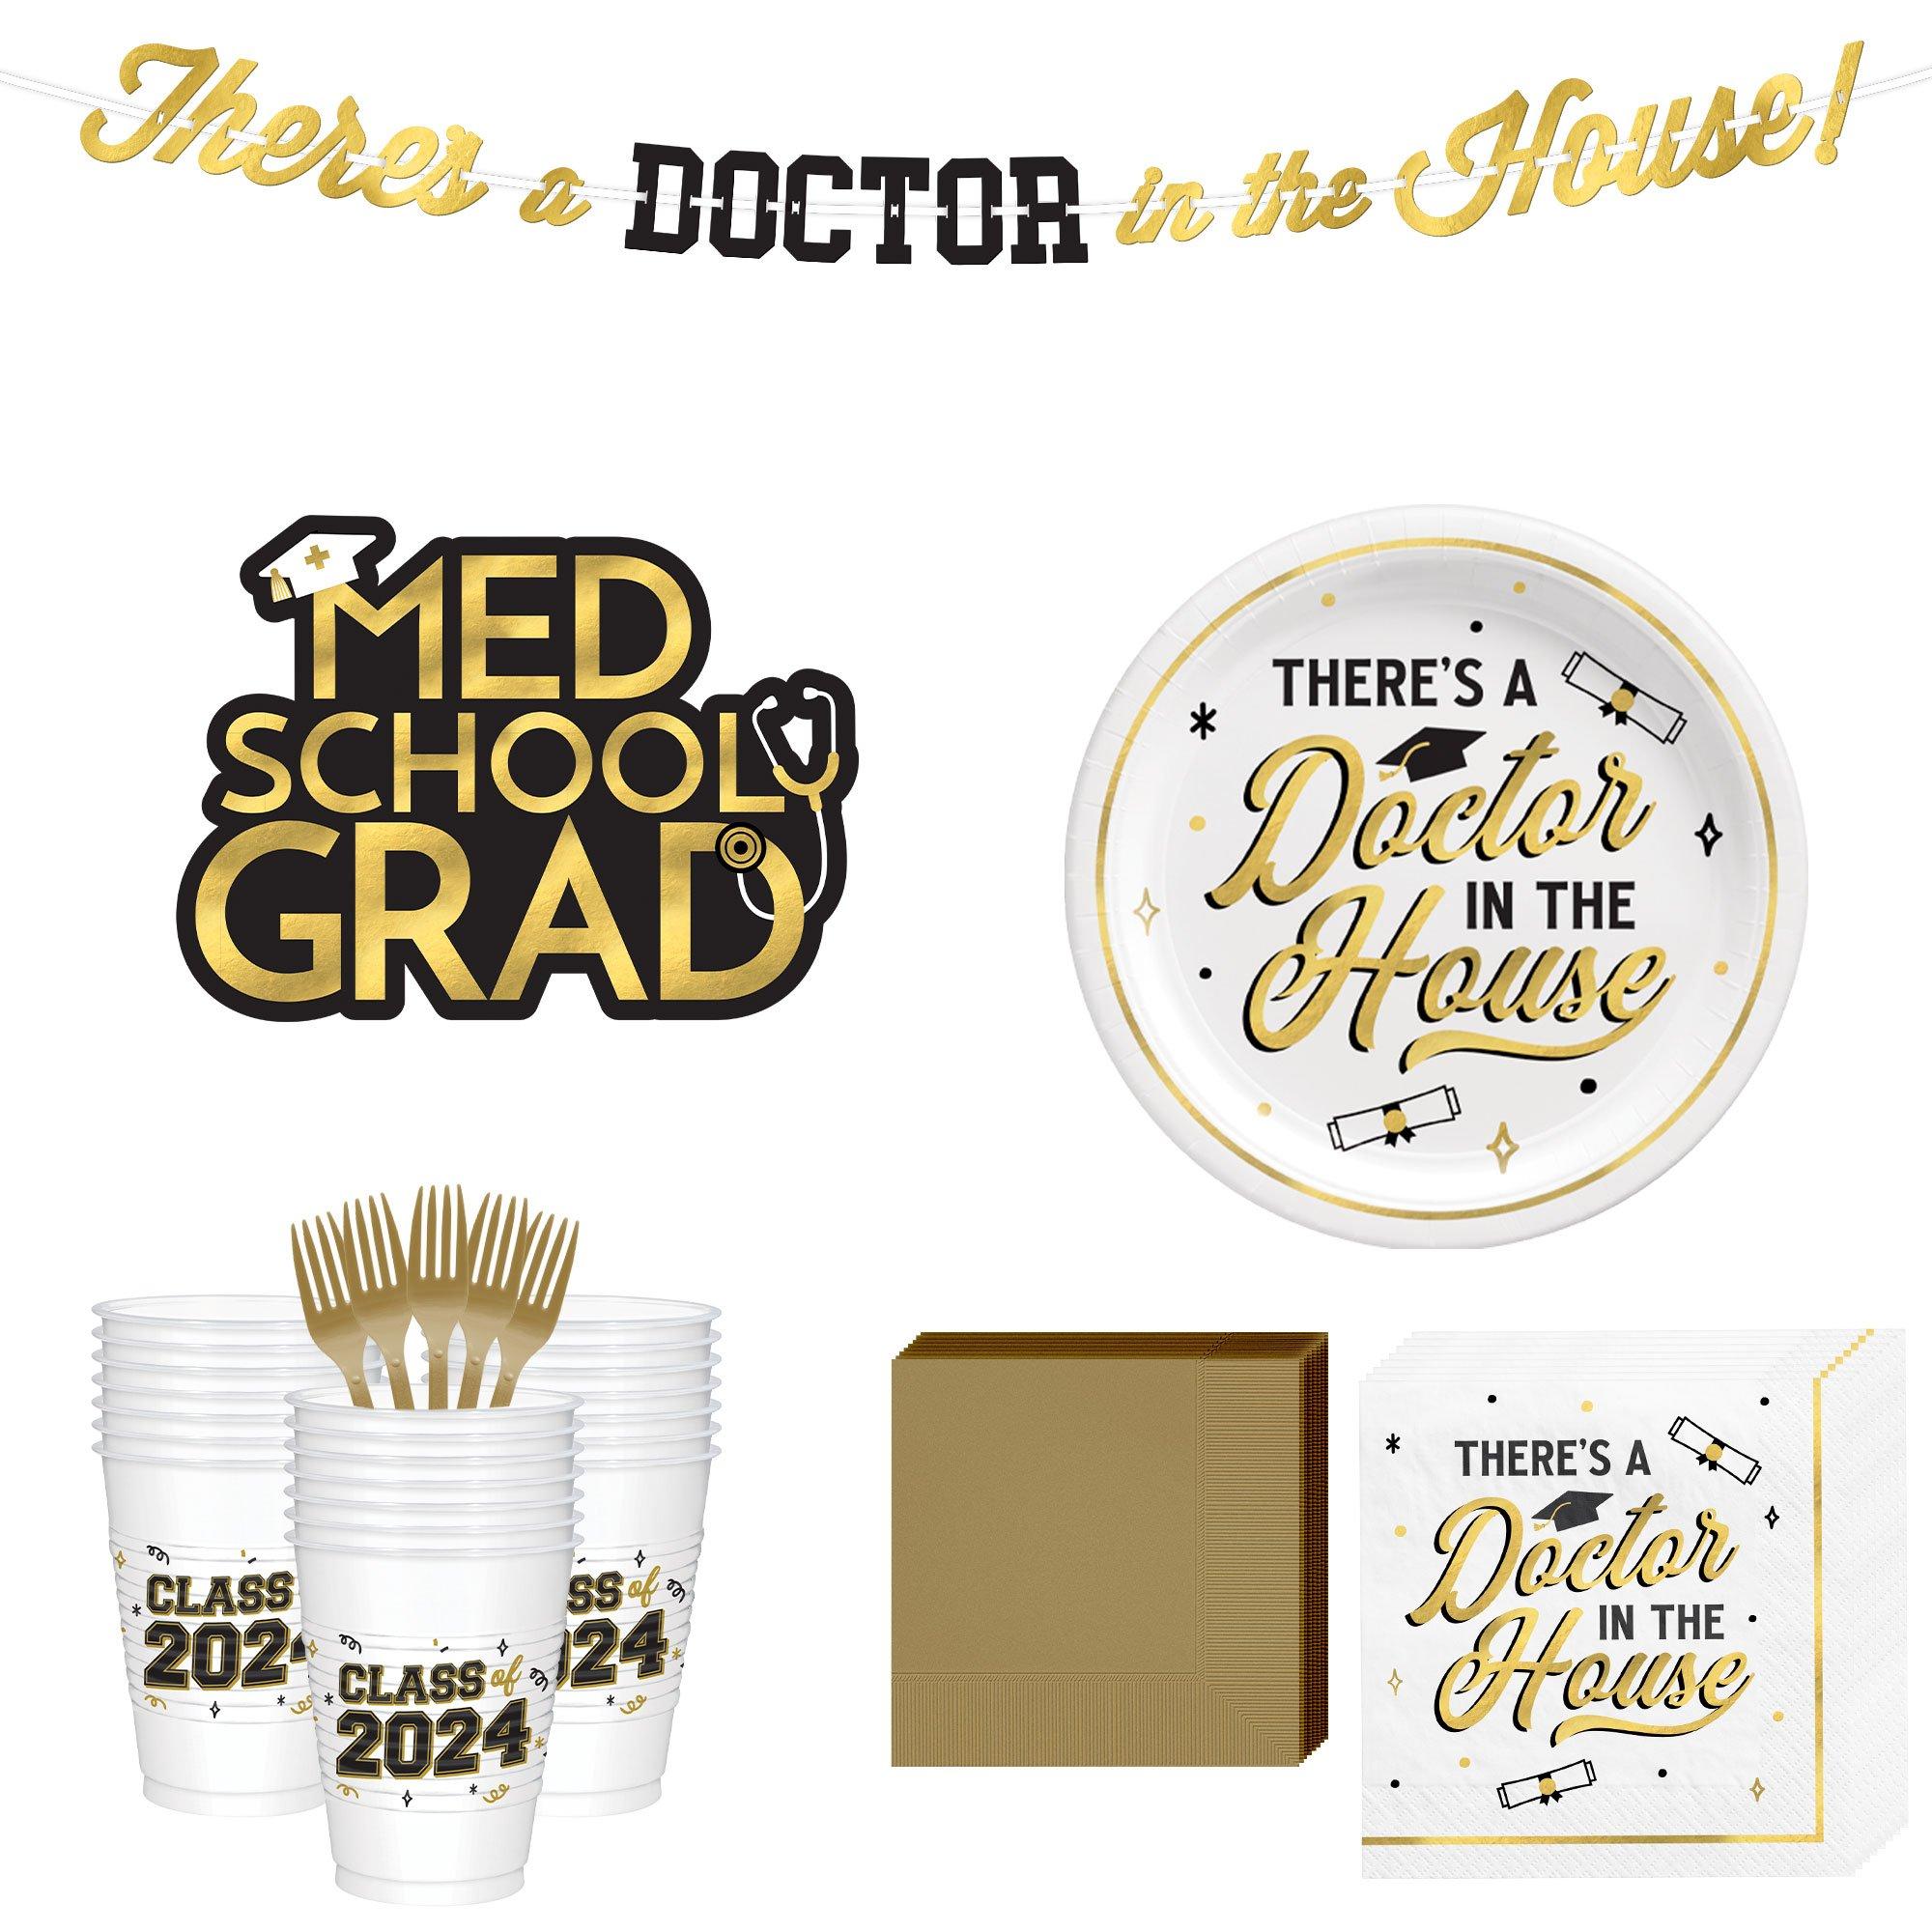 Graduation Party Supplies Kit for 30 with Decorations, Banners, Plates, Napkins, Cups - Doctor in the House